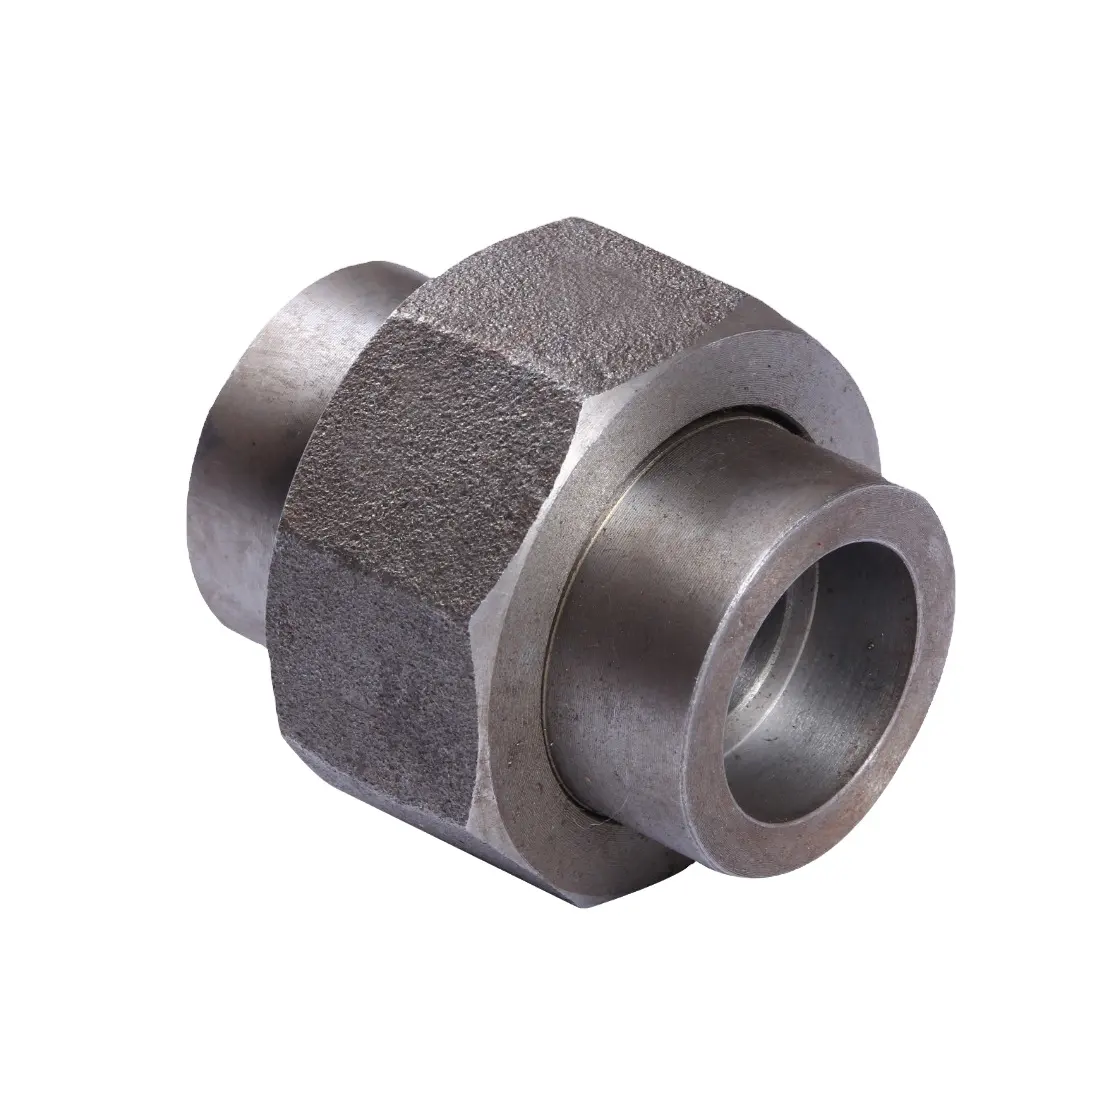 High Quality Female Threaded Union Stainless Steel Pipe Fitting Union High Pressure Socket Weld Union